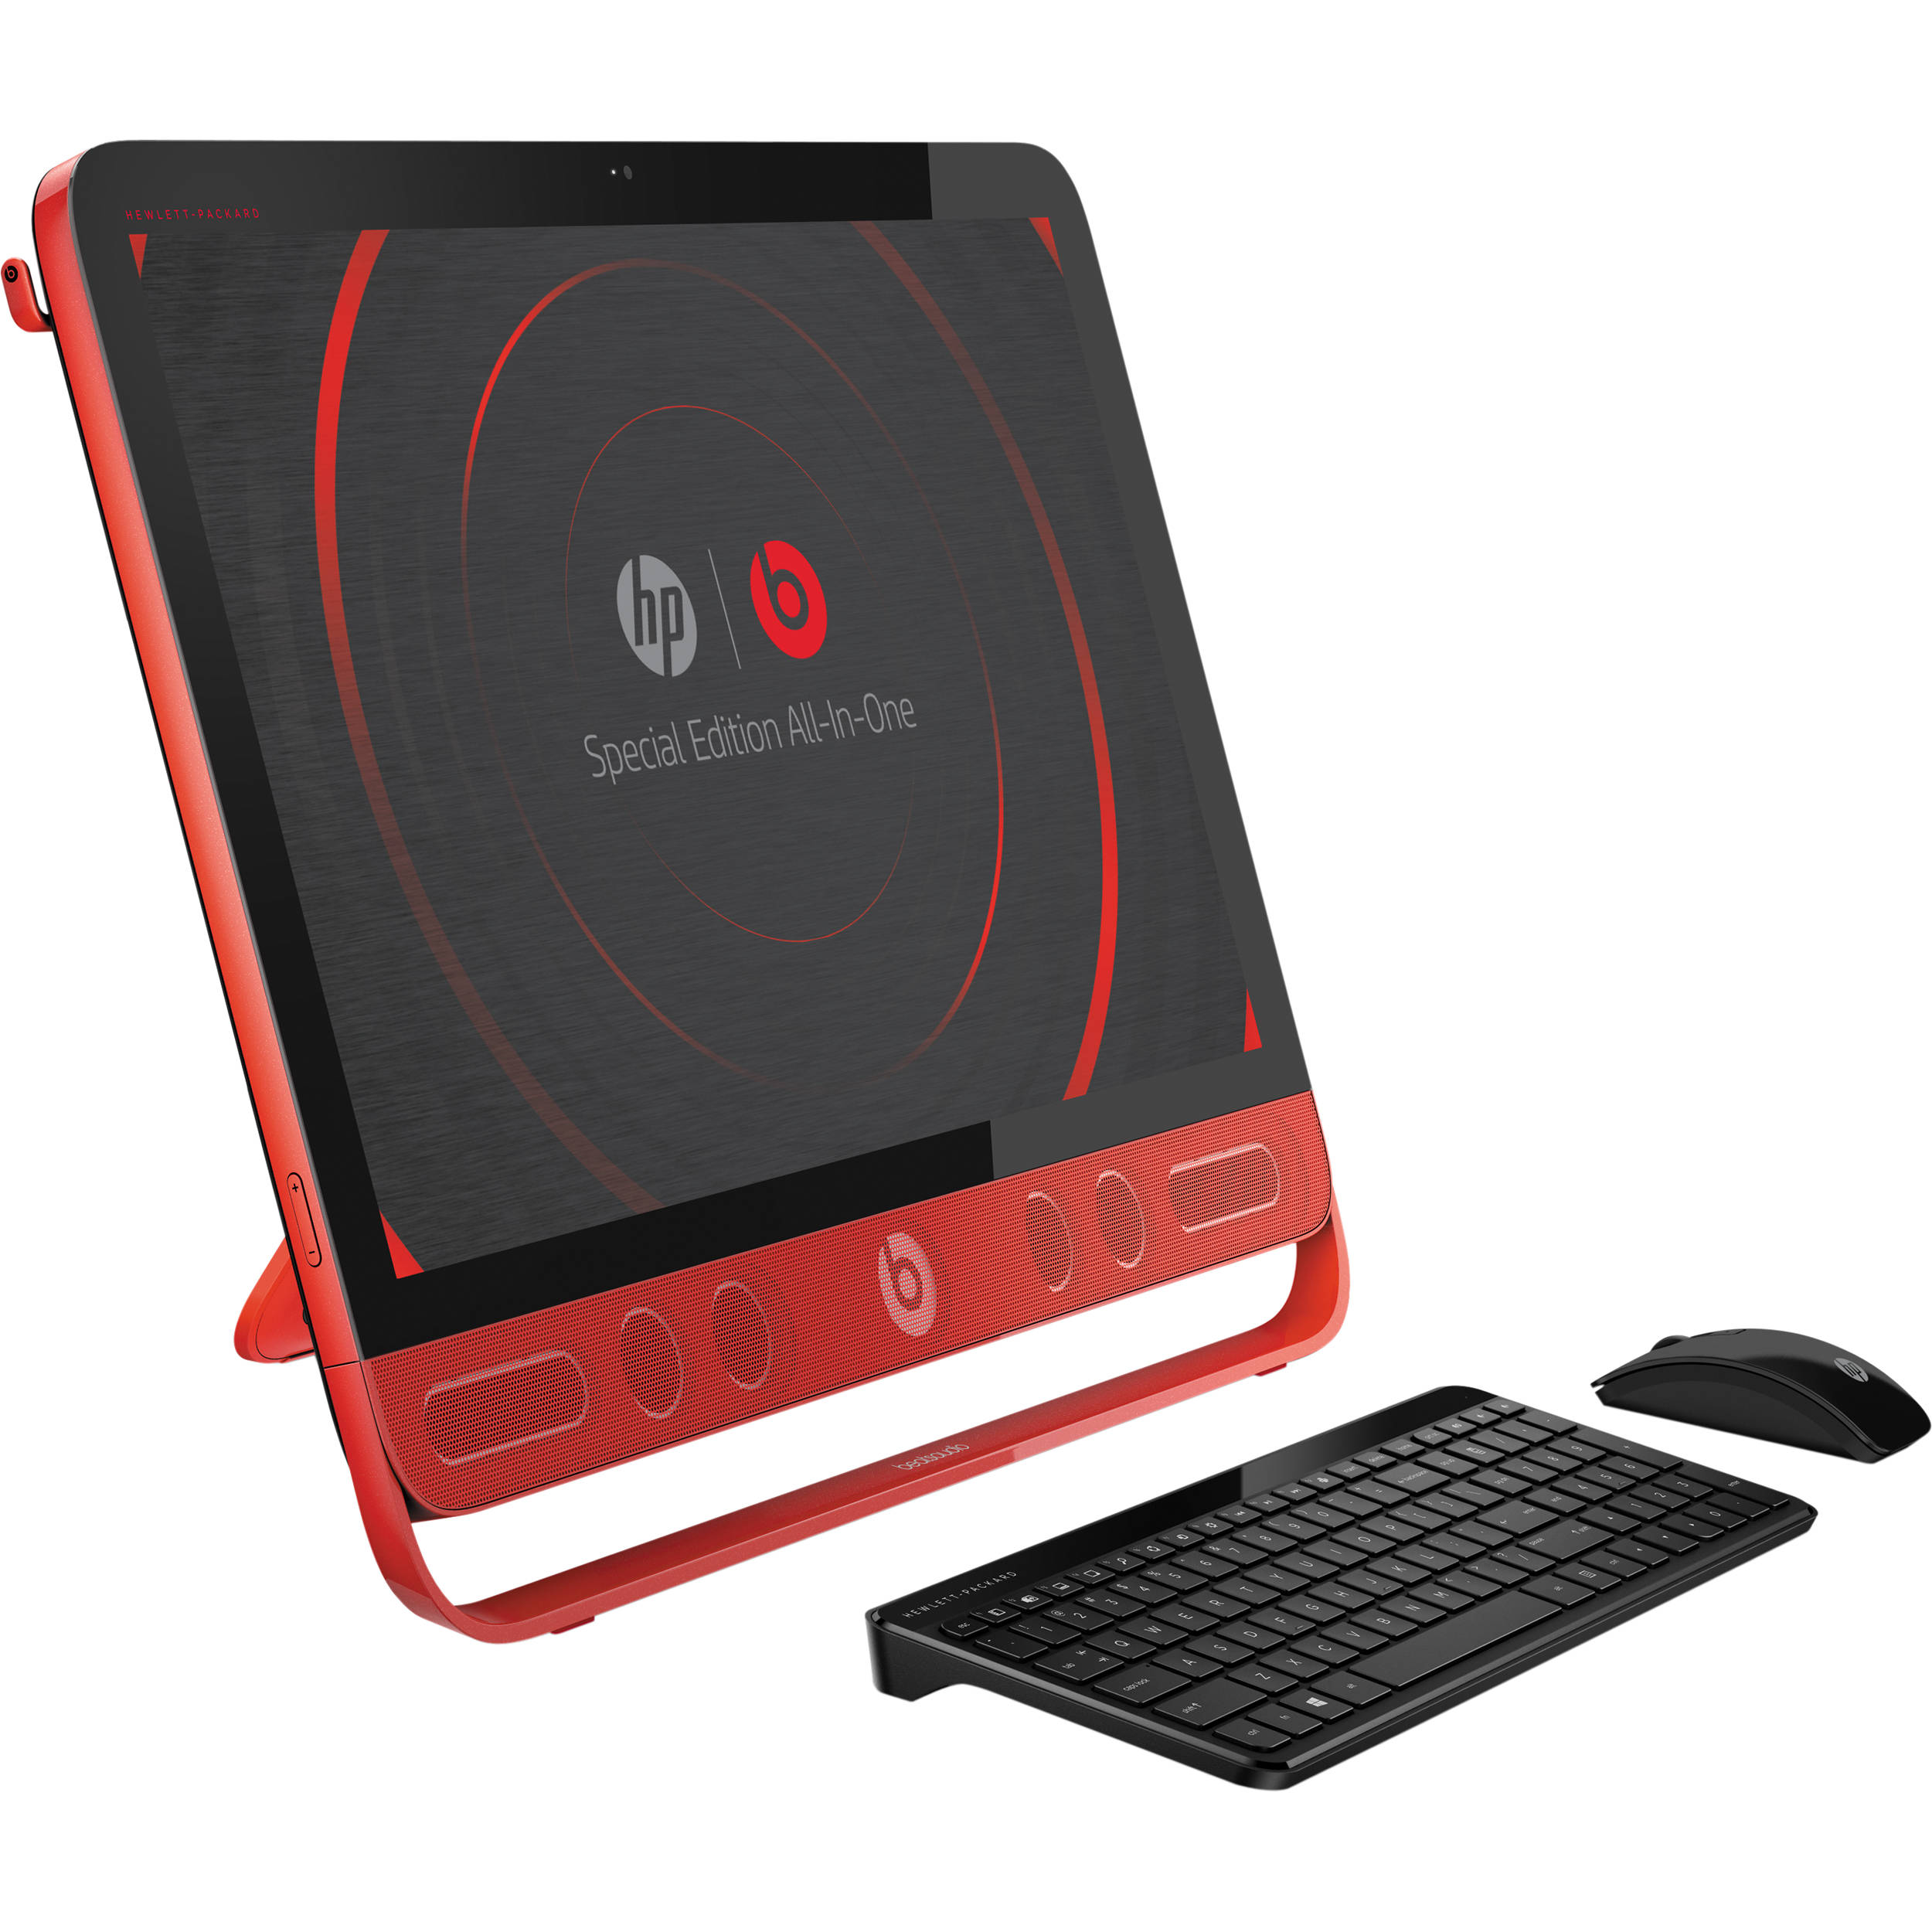 HP Envy Beats Special Edition 23-n010 